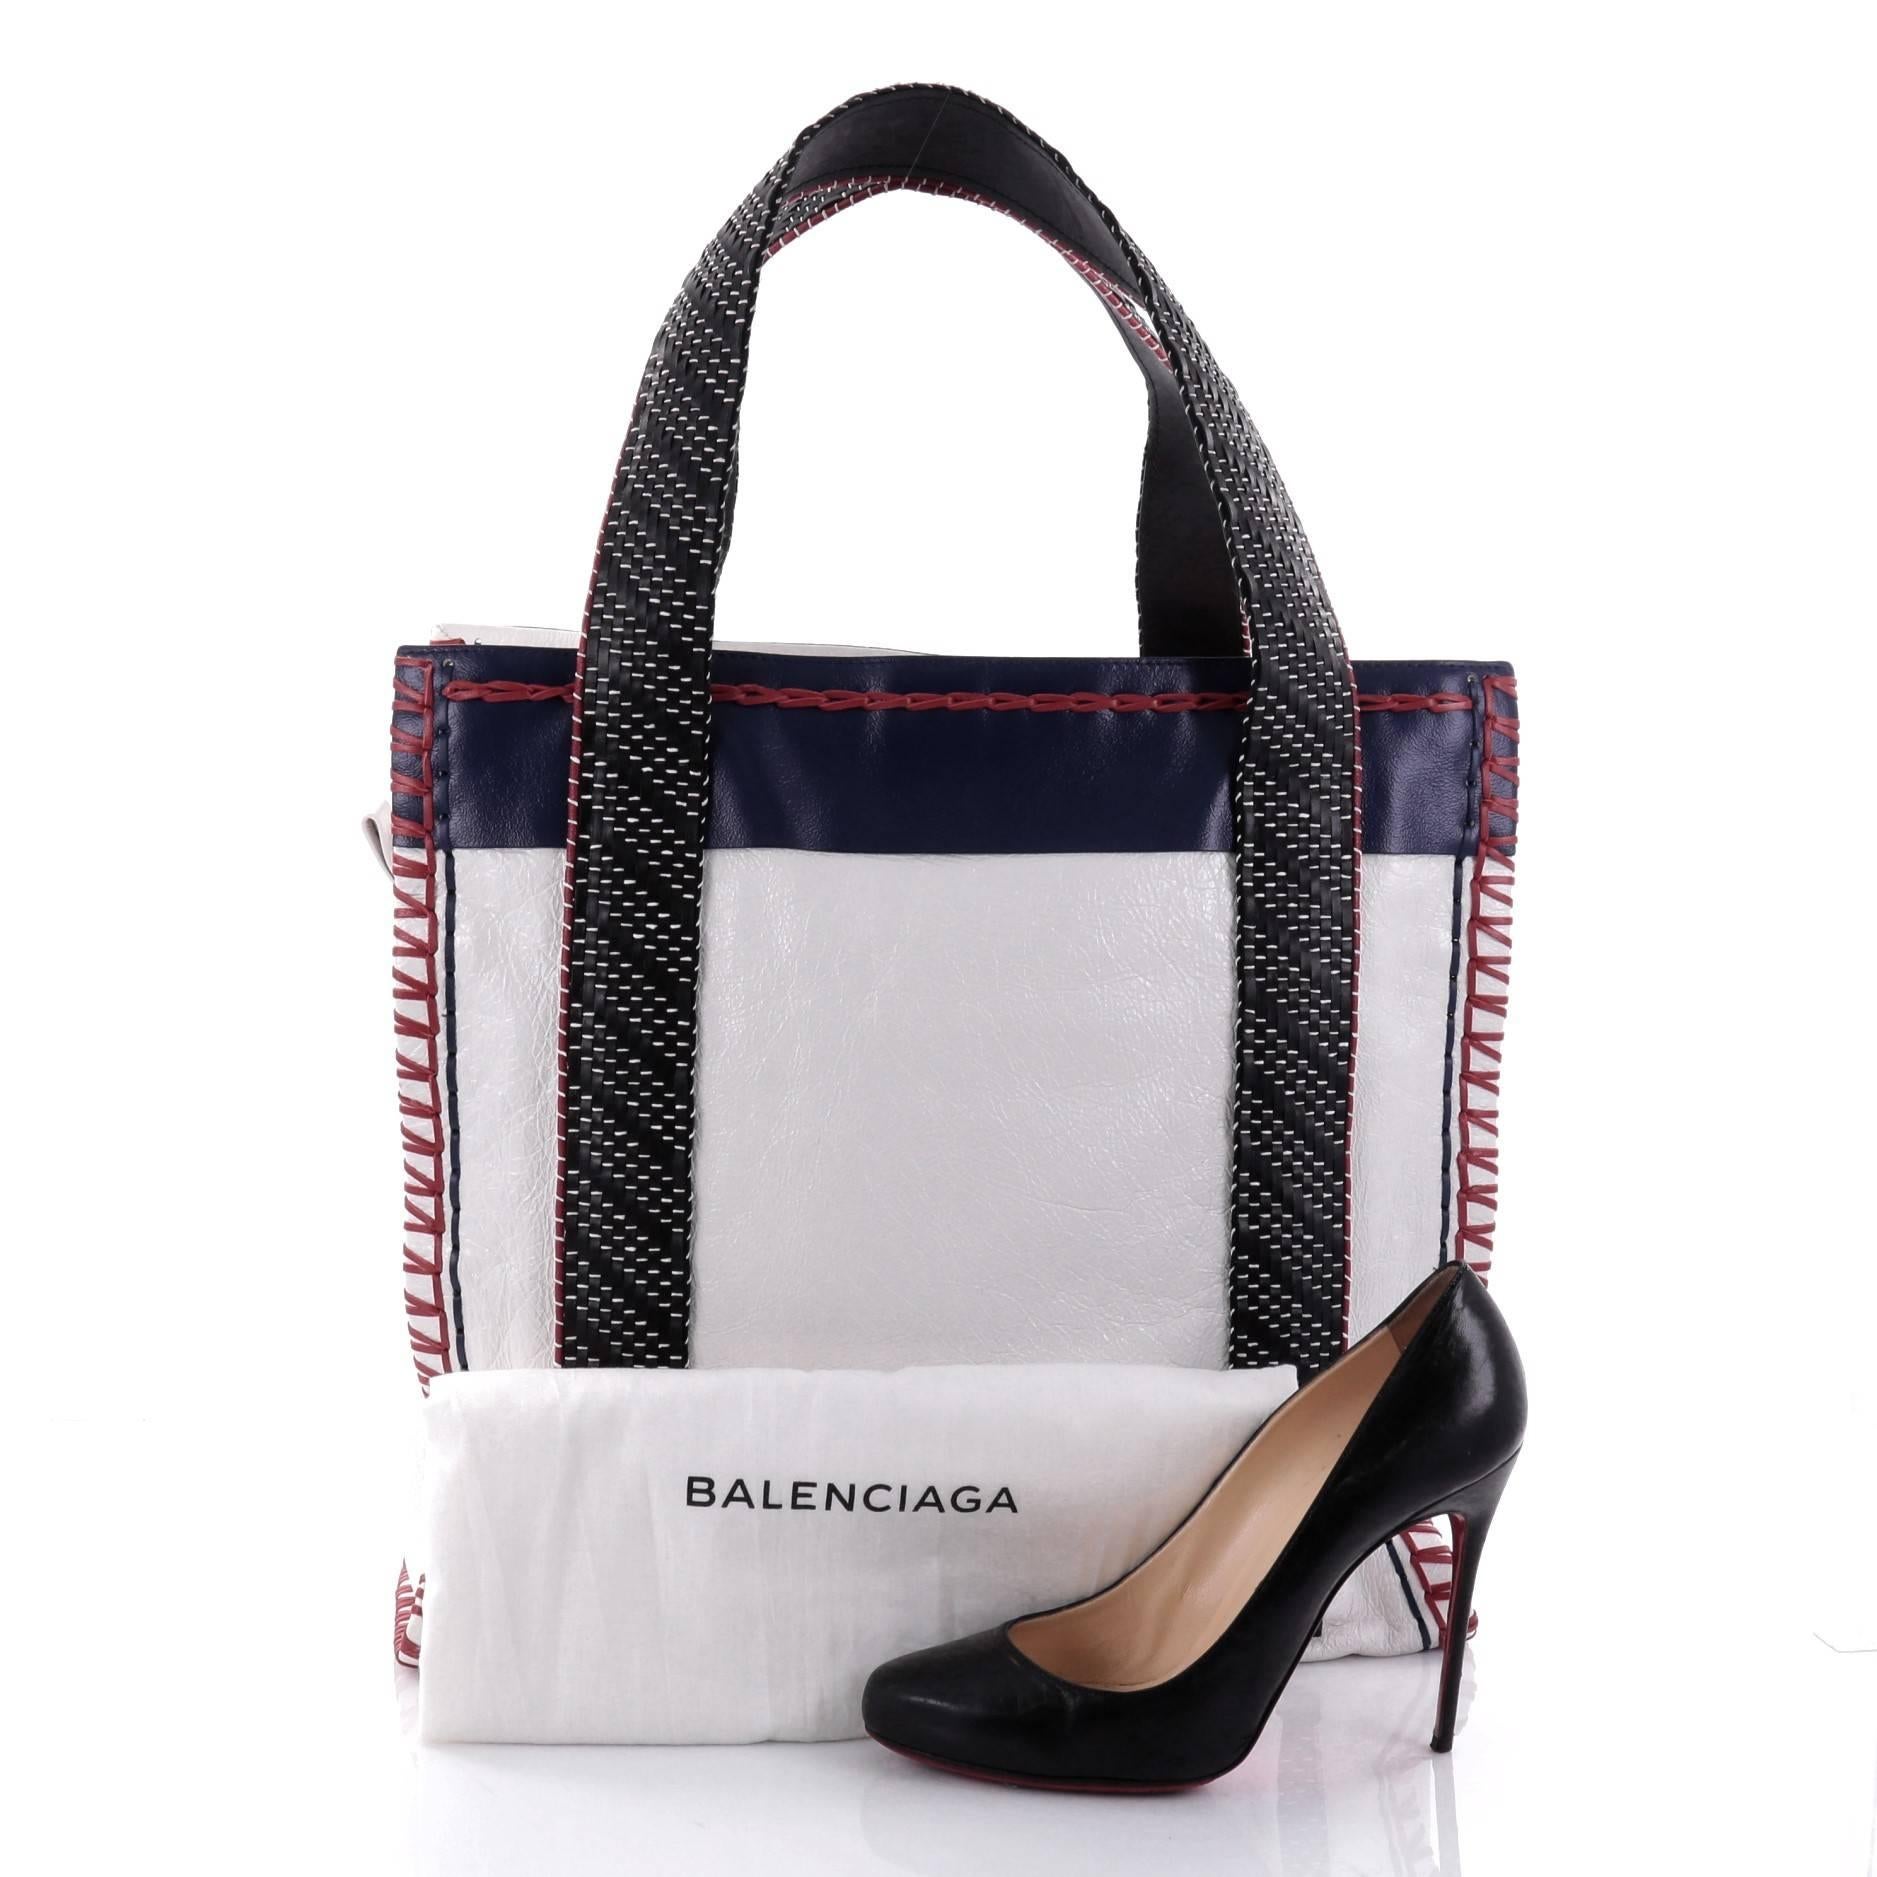 This authentic Balenciaga Scaffold Shopper Tote Whipstitch Leather Medium is a stylish and unique bag that's a perfect addition to the house's coveted bag collection. Crafted in white leather with navy leather panels, this bag features dual flat